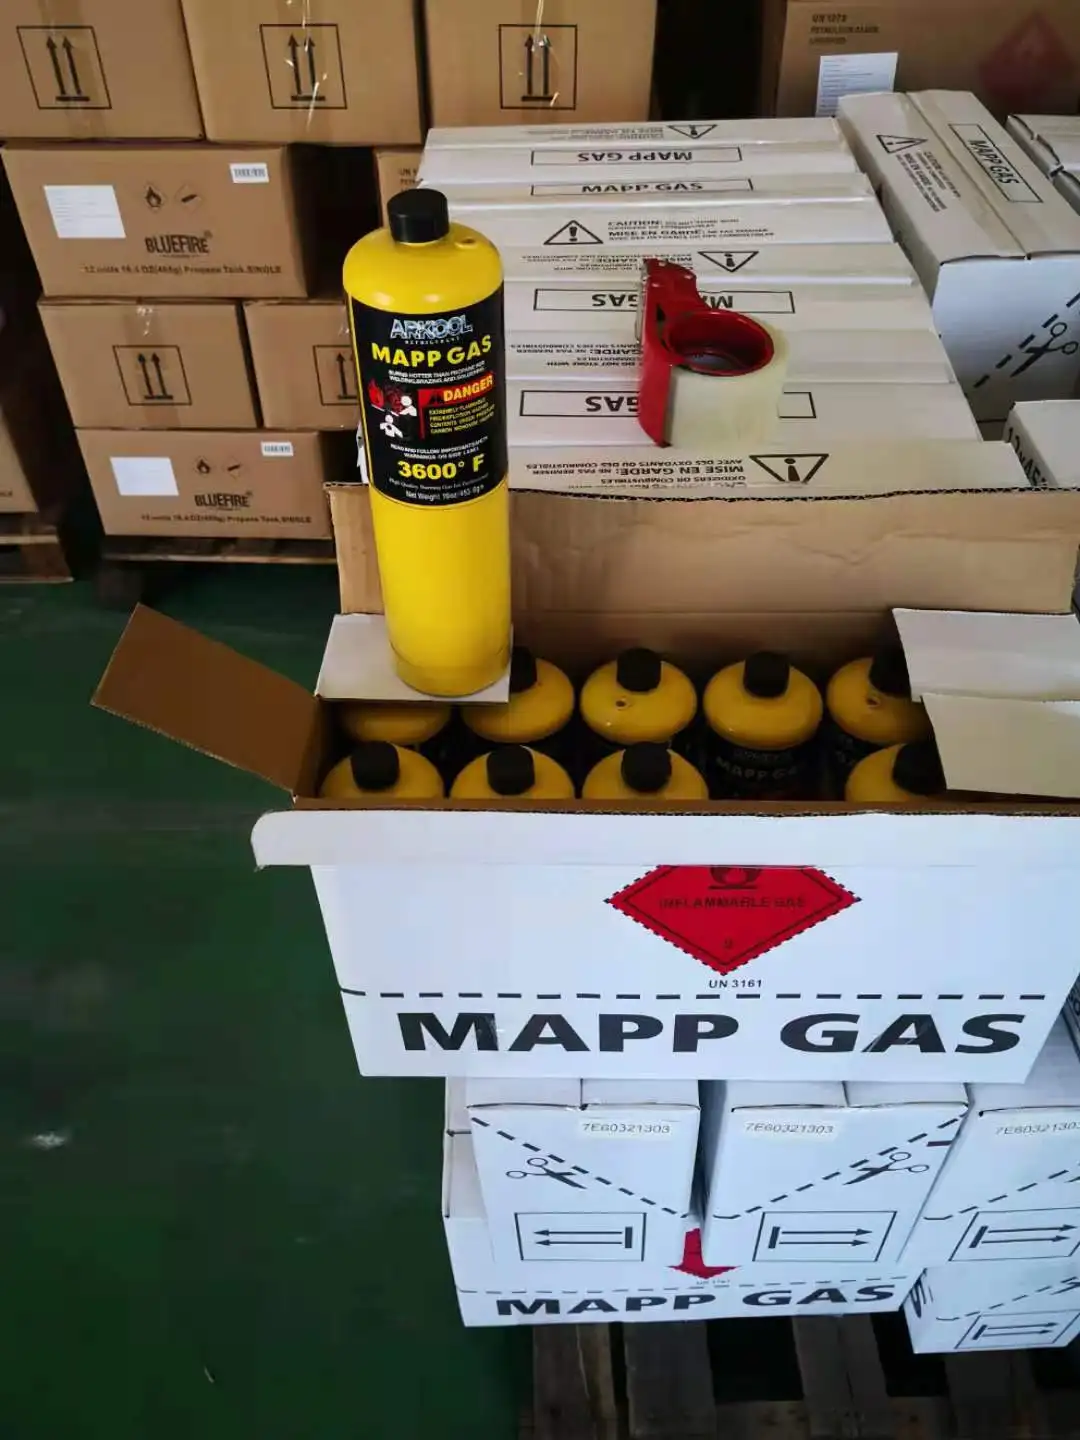 Mixture Of Hydrocarbons Mapp Gas for sale best price high quality burning gas for professional net weight 16OZ/453.6g